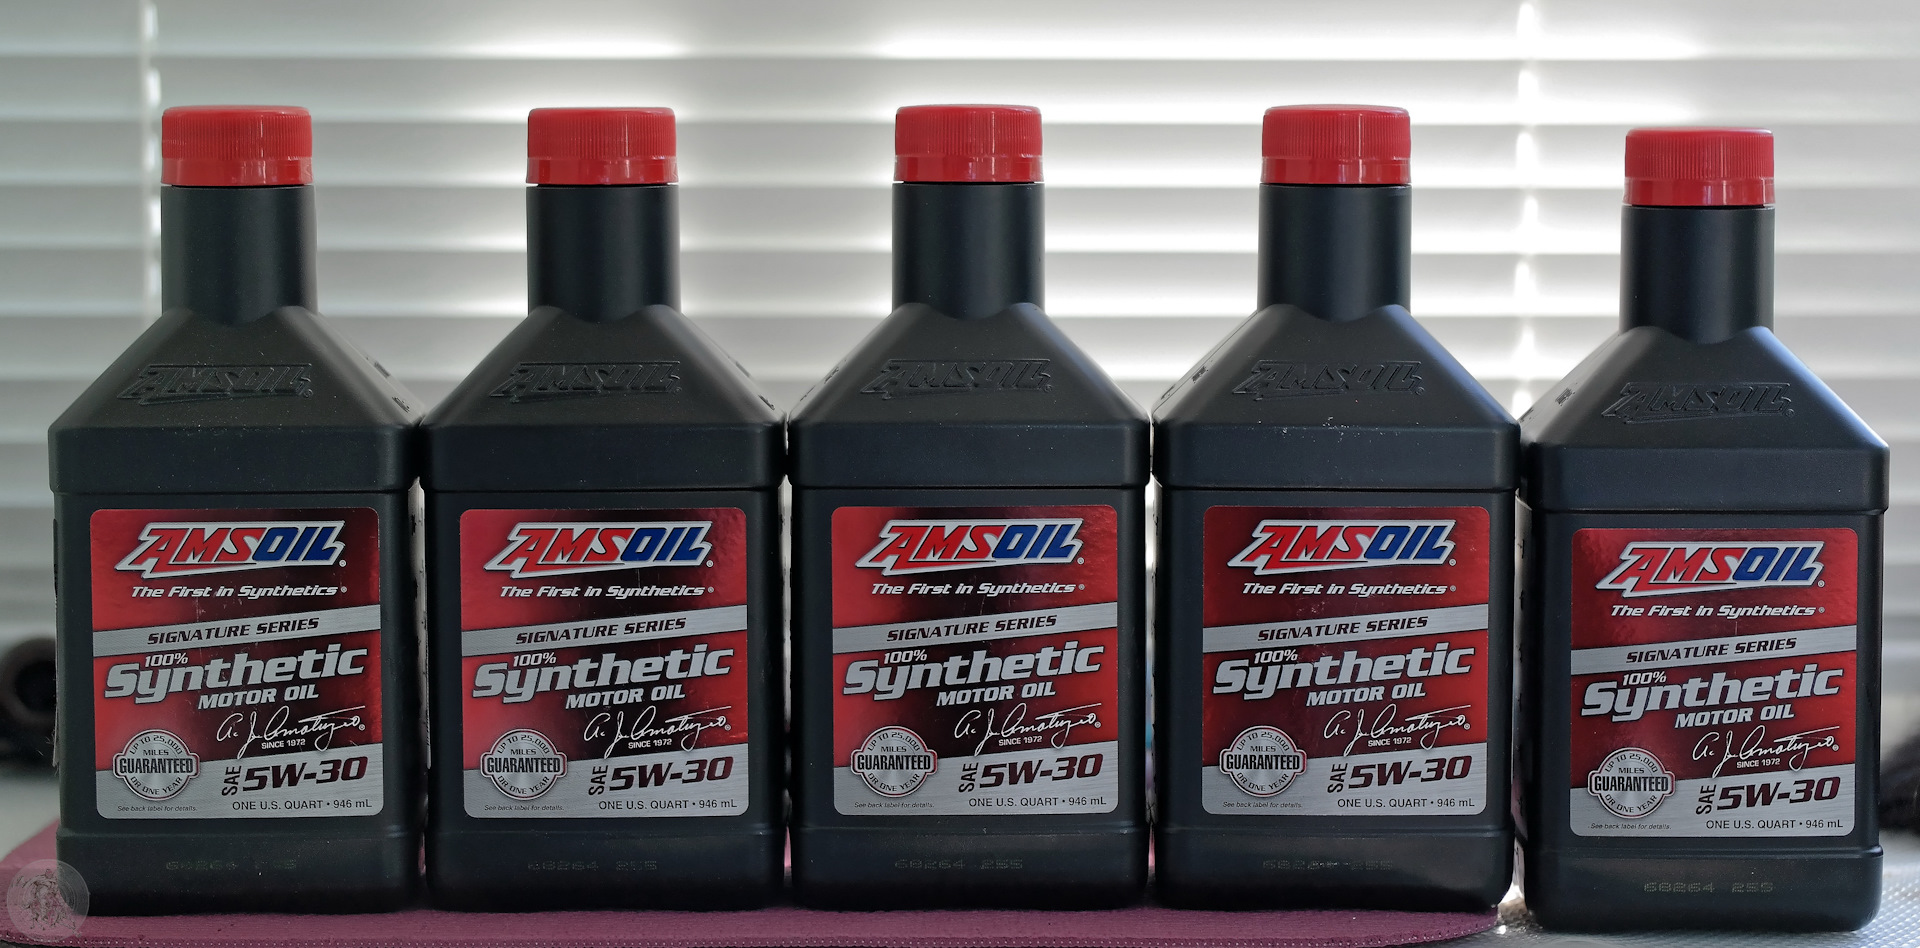 Signature series synthetic. AMSOIL Signature Series 100 Synthetic 5w-30. AMSOIL Signature Series 100% Synthetic 5w30 (asl1g),. AMSOIL 5w30. Моторное масло AMSOIL 5w30.